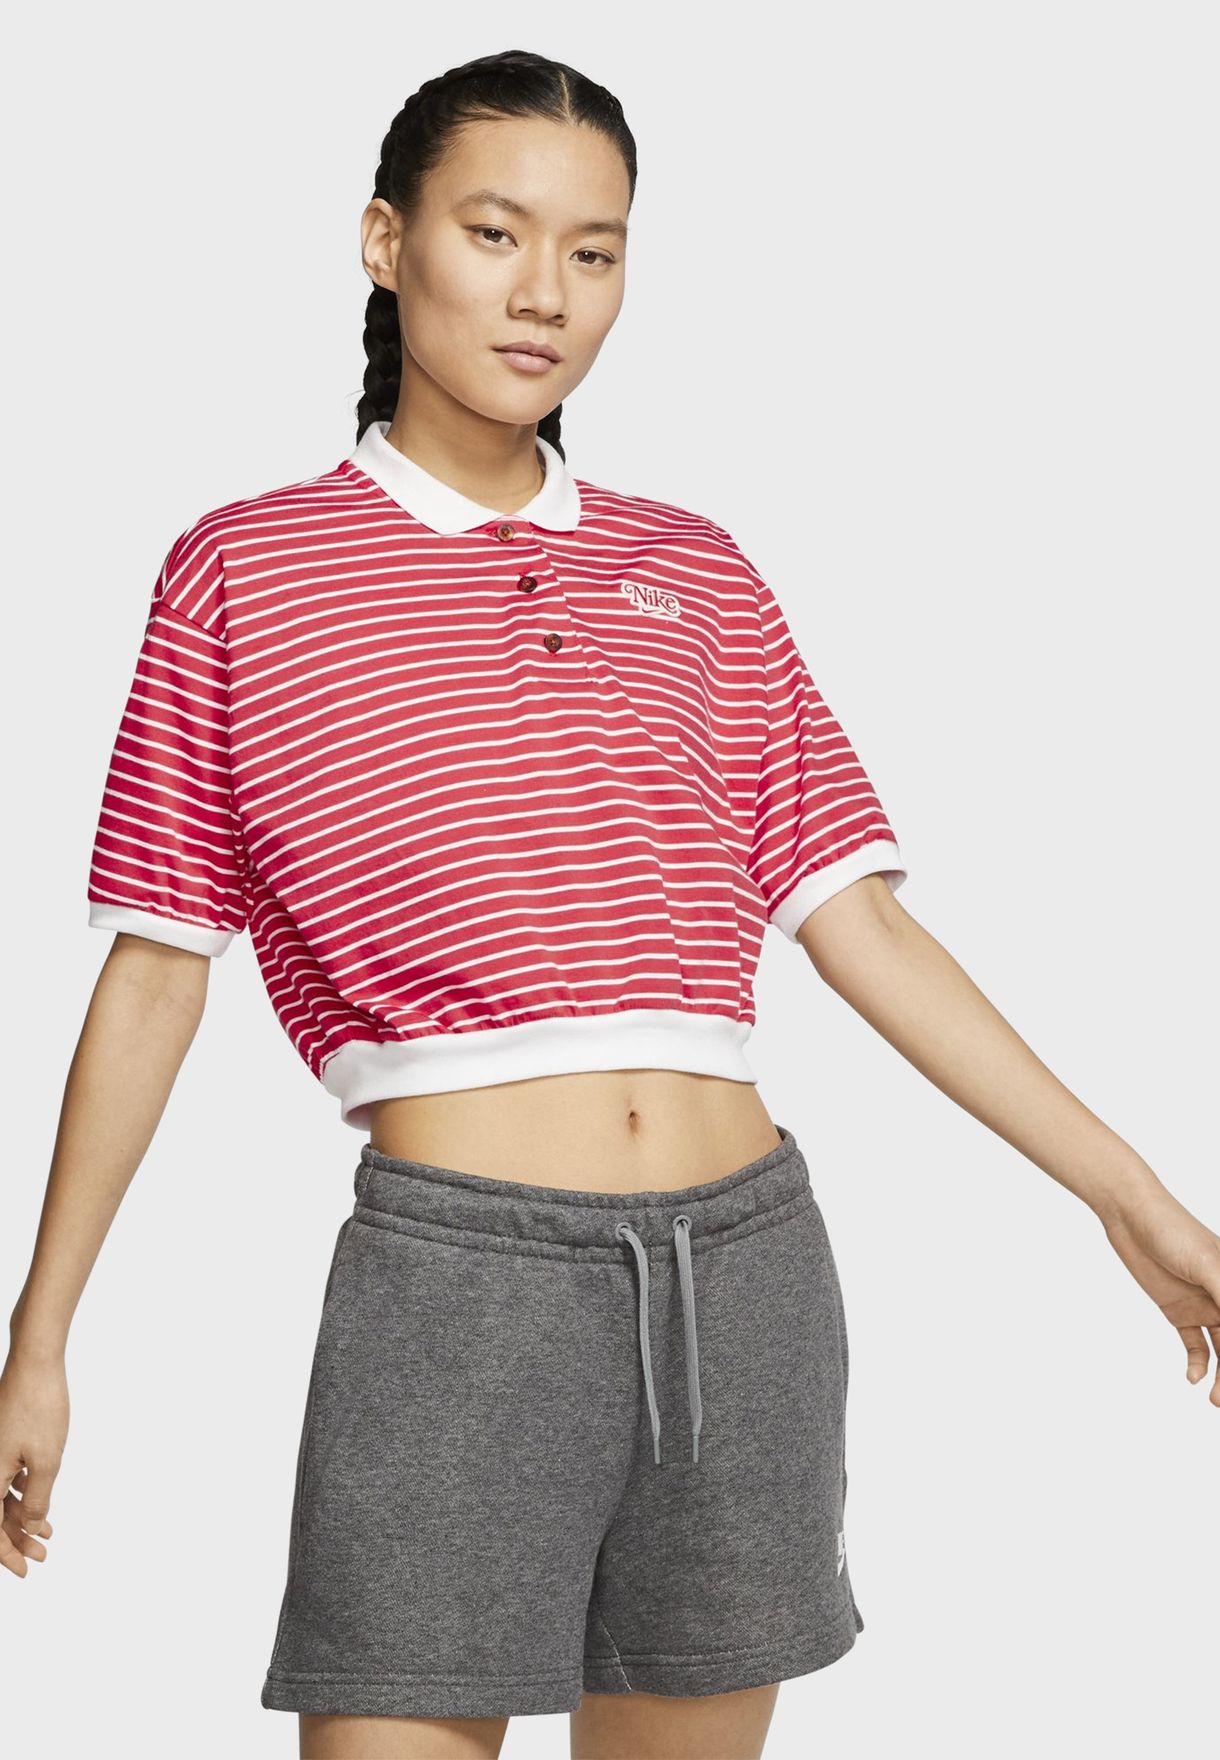 nike retro femme collection